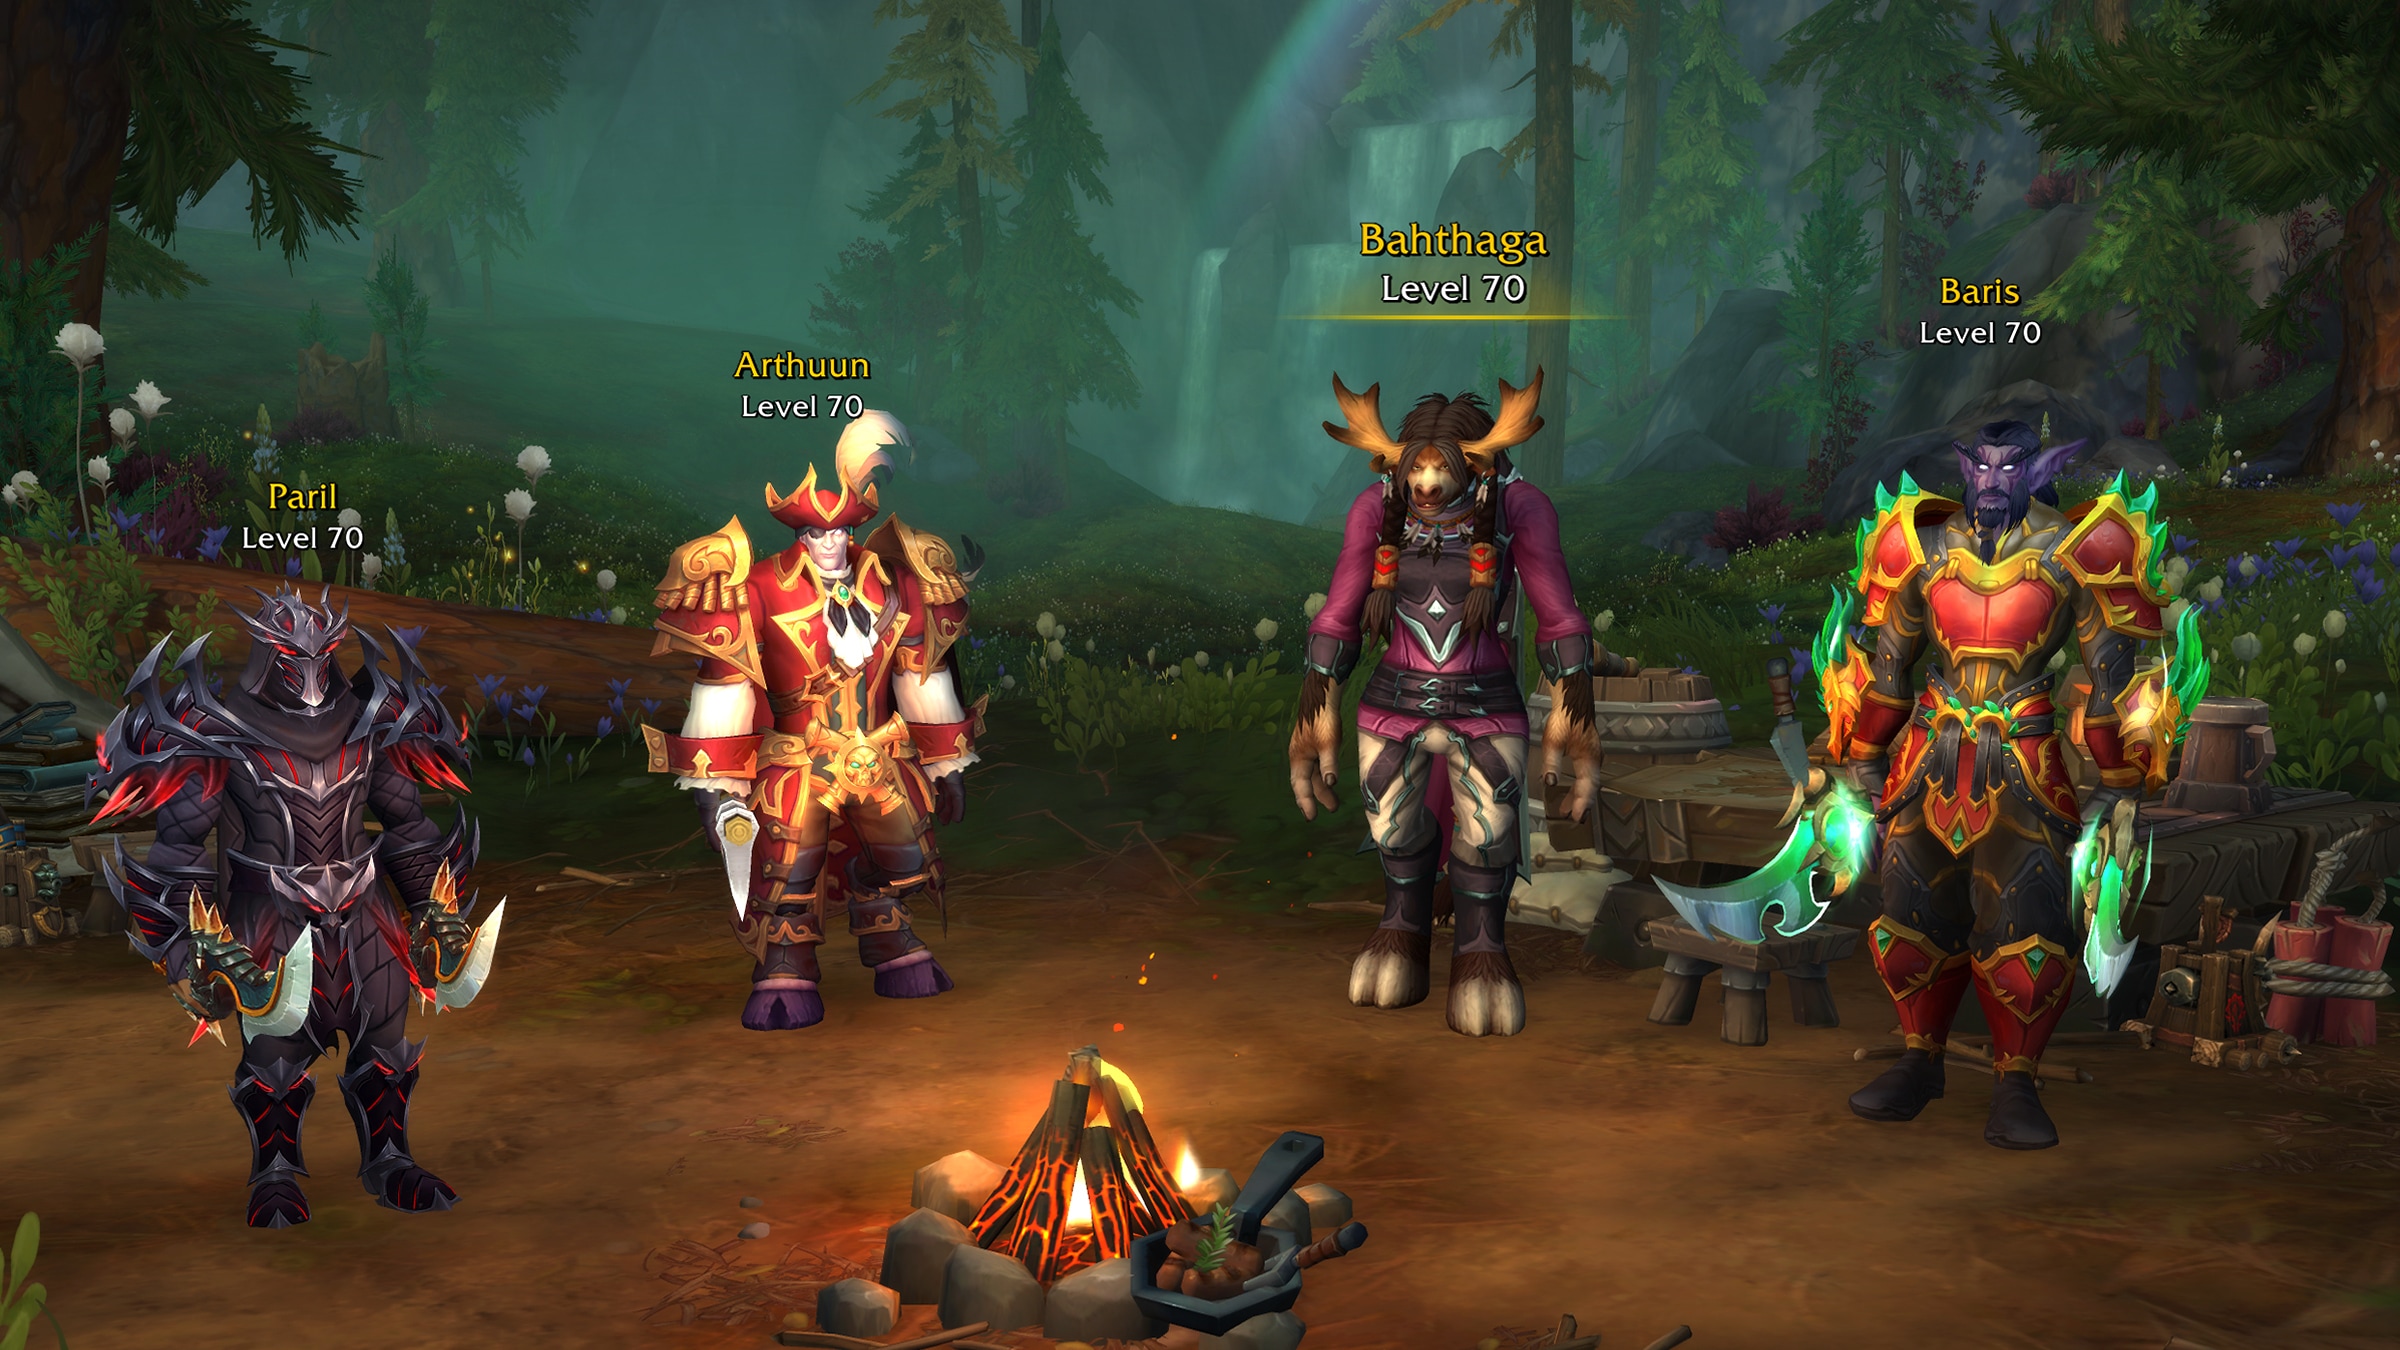 An image showing a warband in World of Warcraft: Dragonflight - several adventurers standing ready for action in front of a campfire.